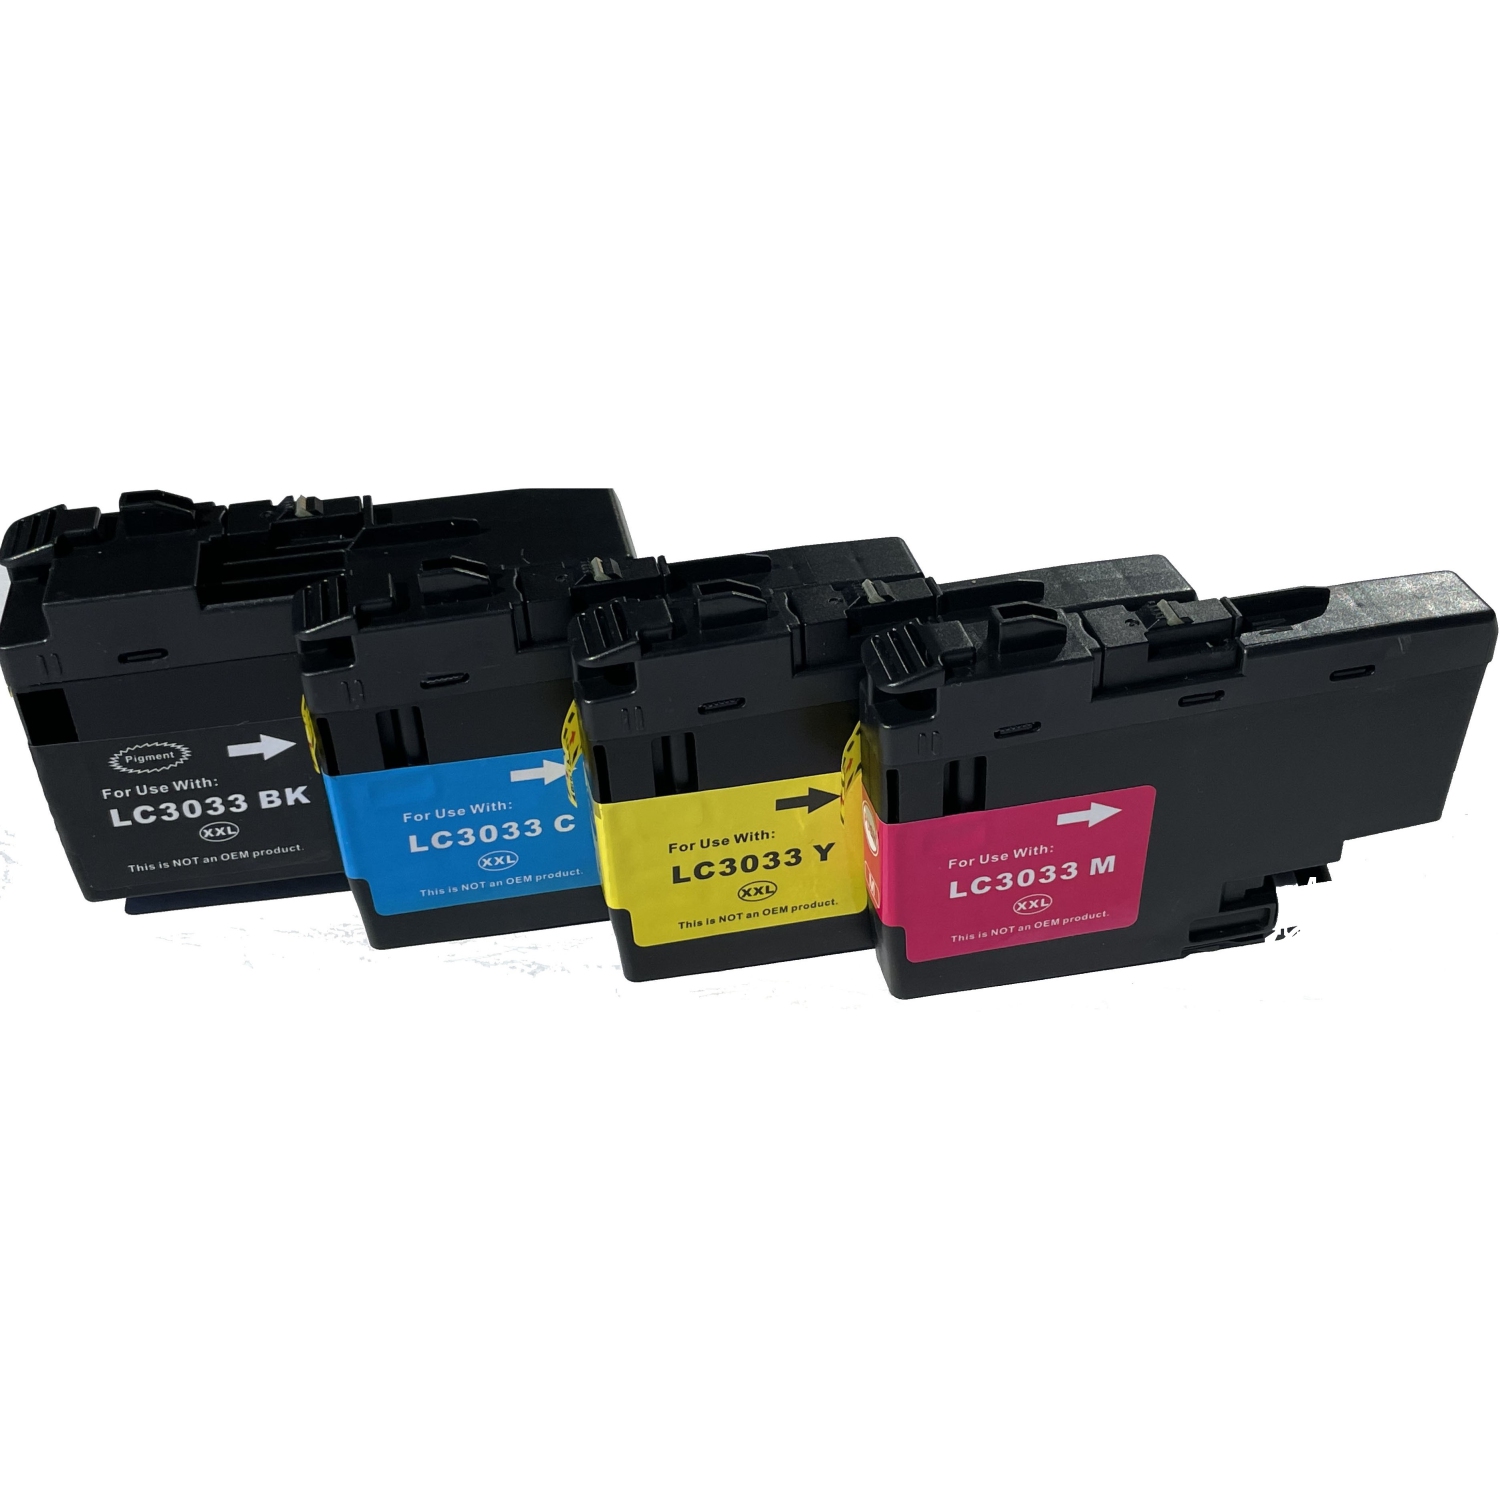 toner4u - 4 ink (BK, C, M, Y) Compatible LC3033 XXL Ink Cartridge Extra High Yield for Brother LC3033 MFC-J805DW, MFC-J995DW, MFC-J995DWX